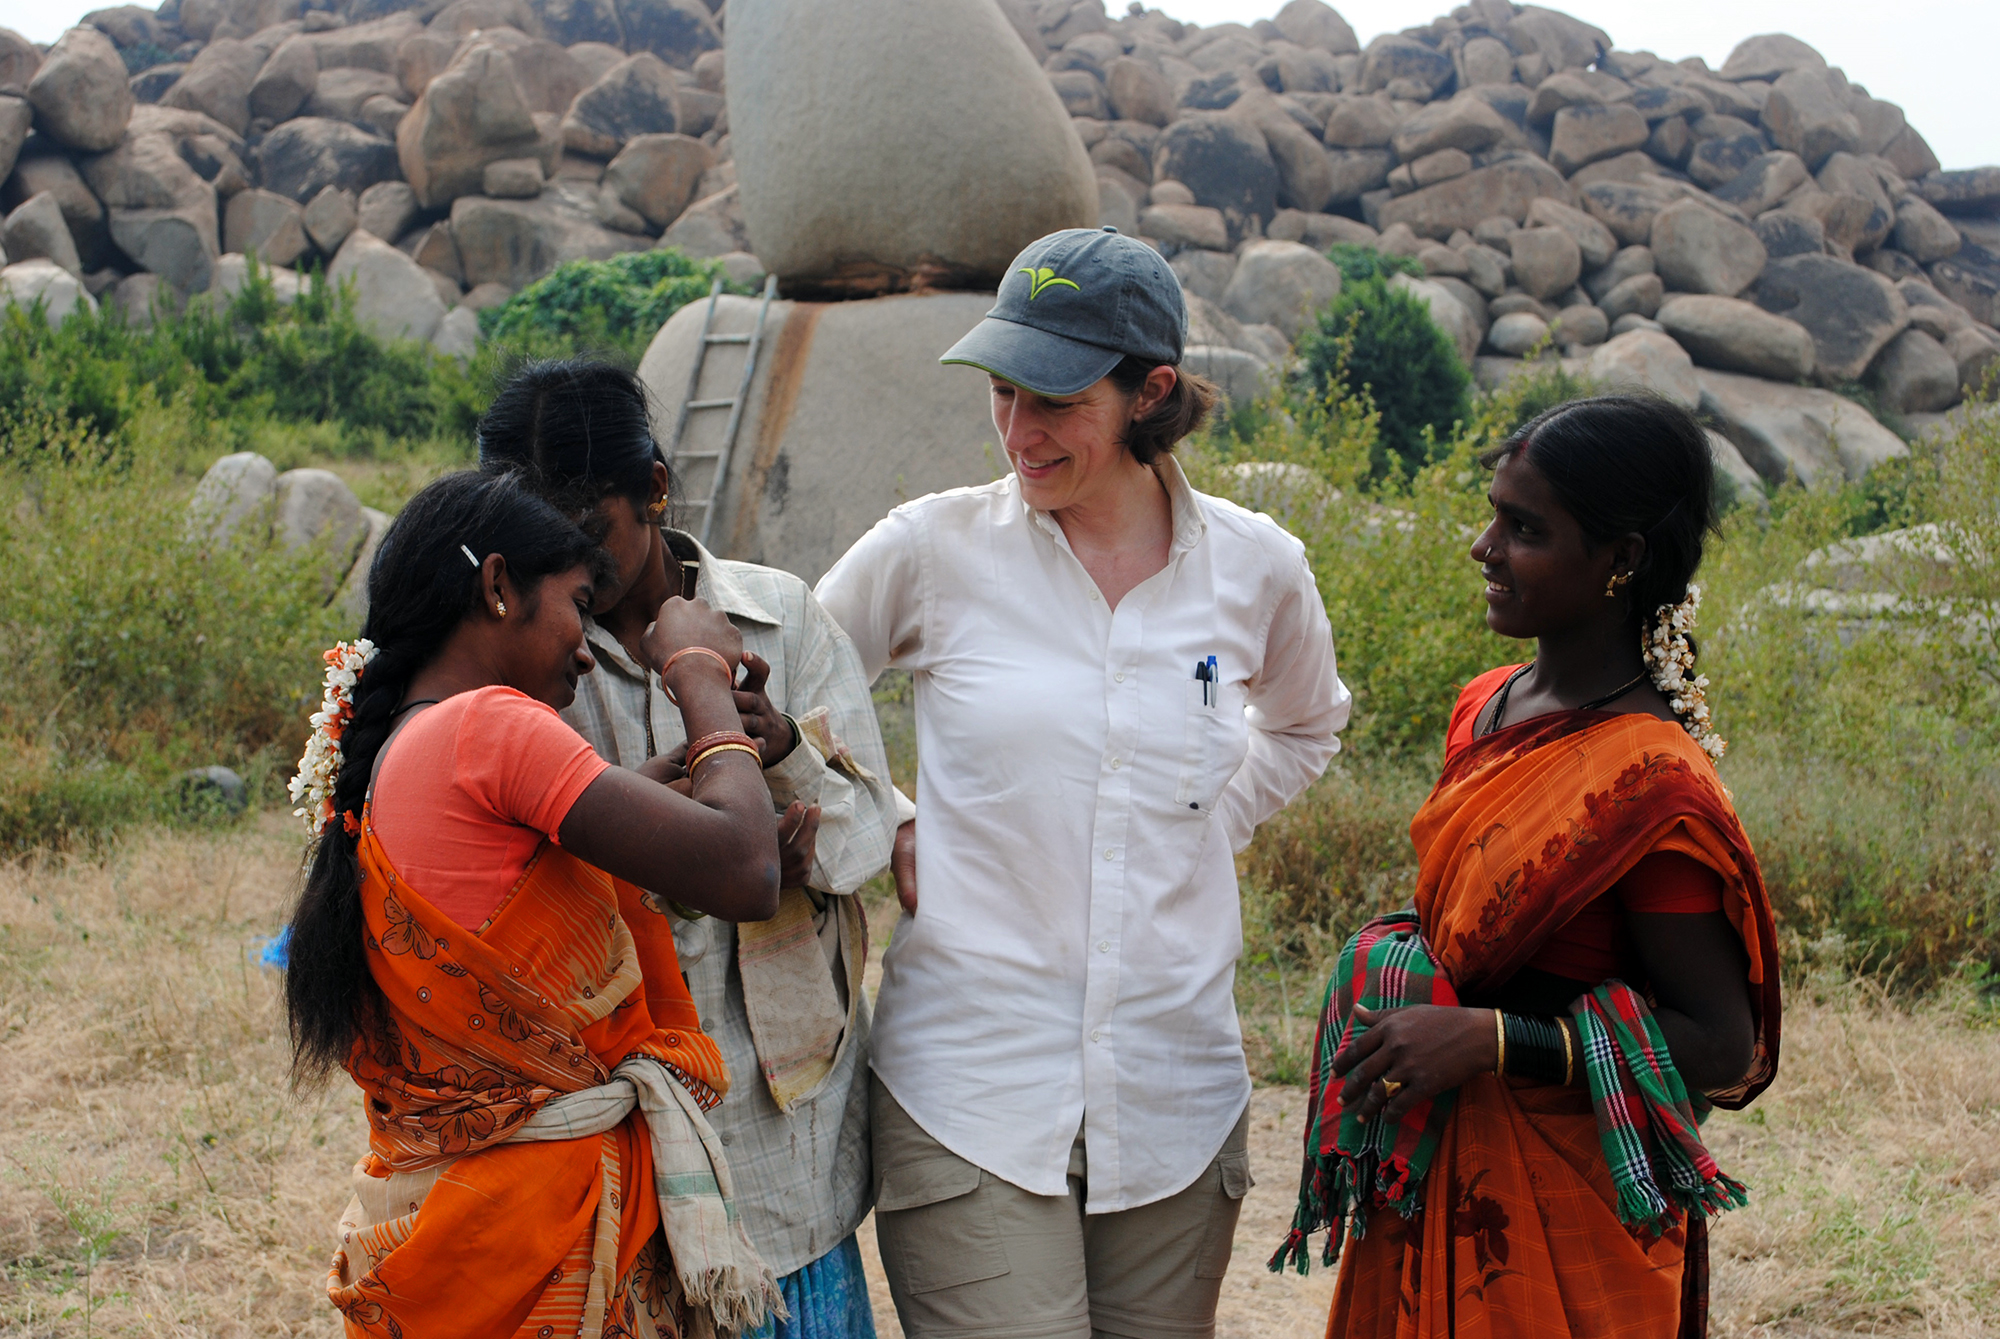 Kathleen Morrison and three people in India.